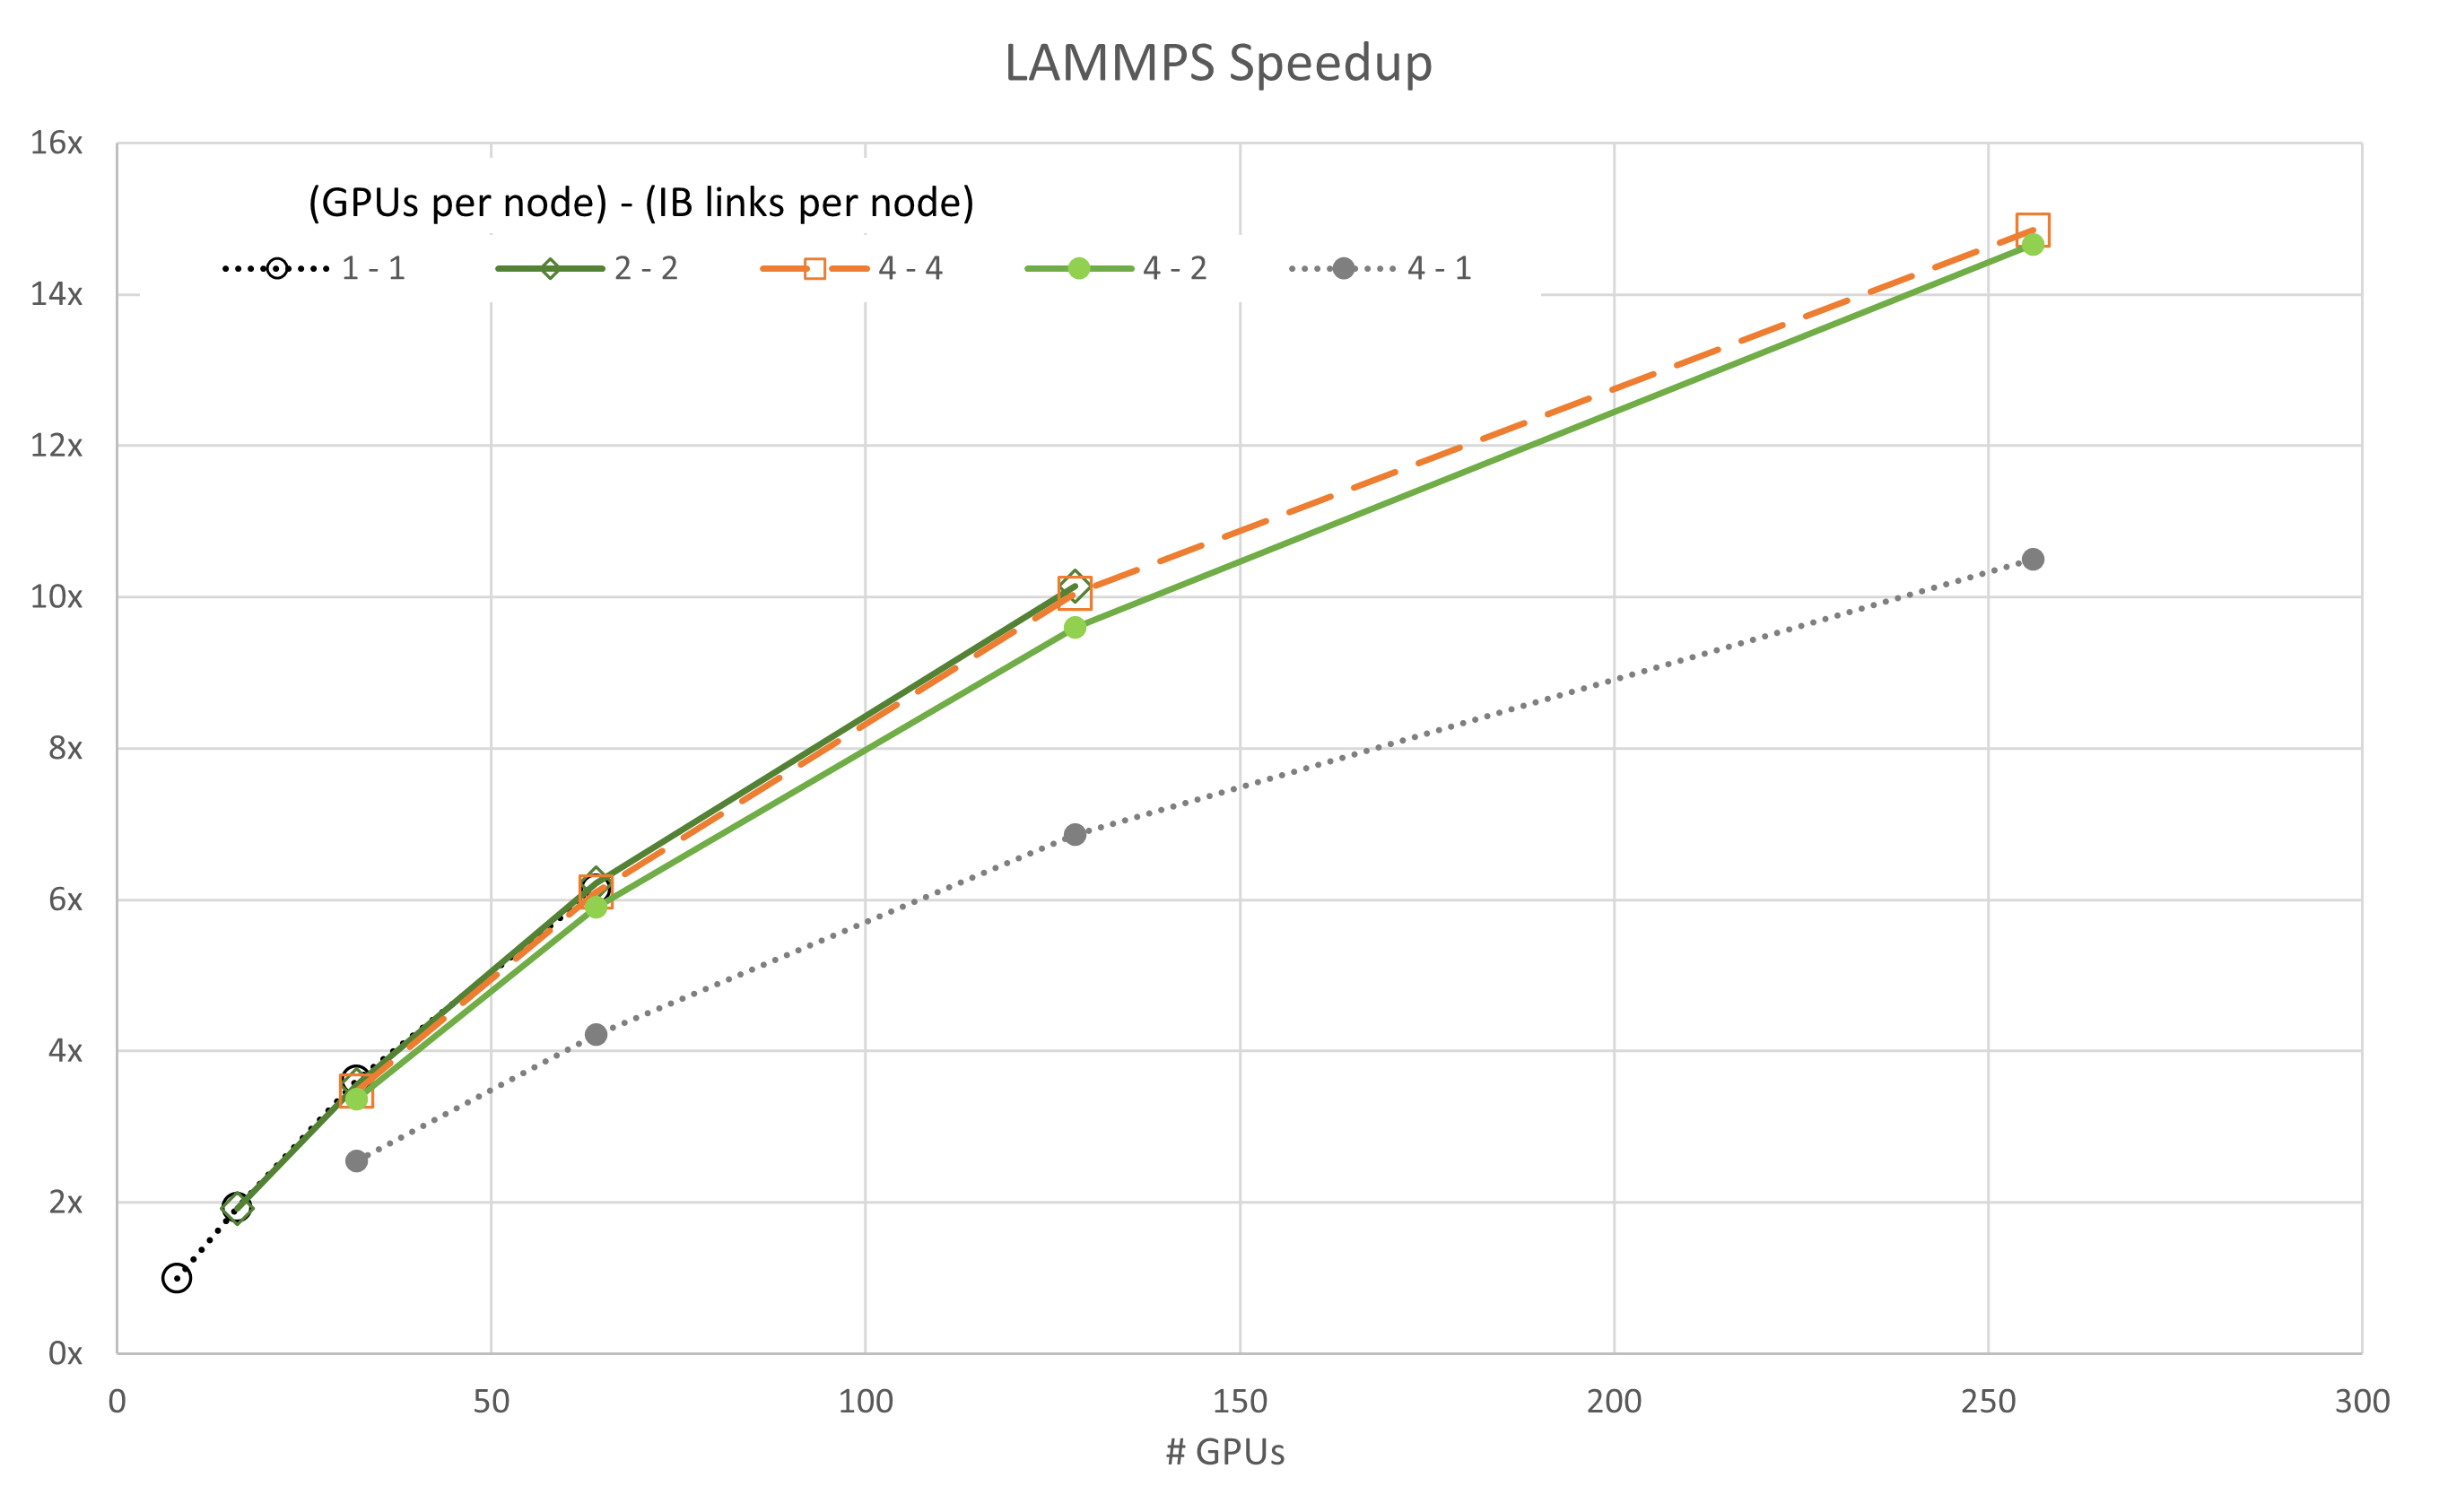 All LAMMPS configurations scaling almost identically except 4-1 is 20% worse.